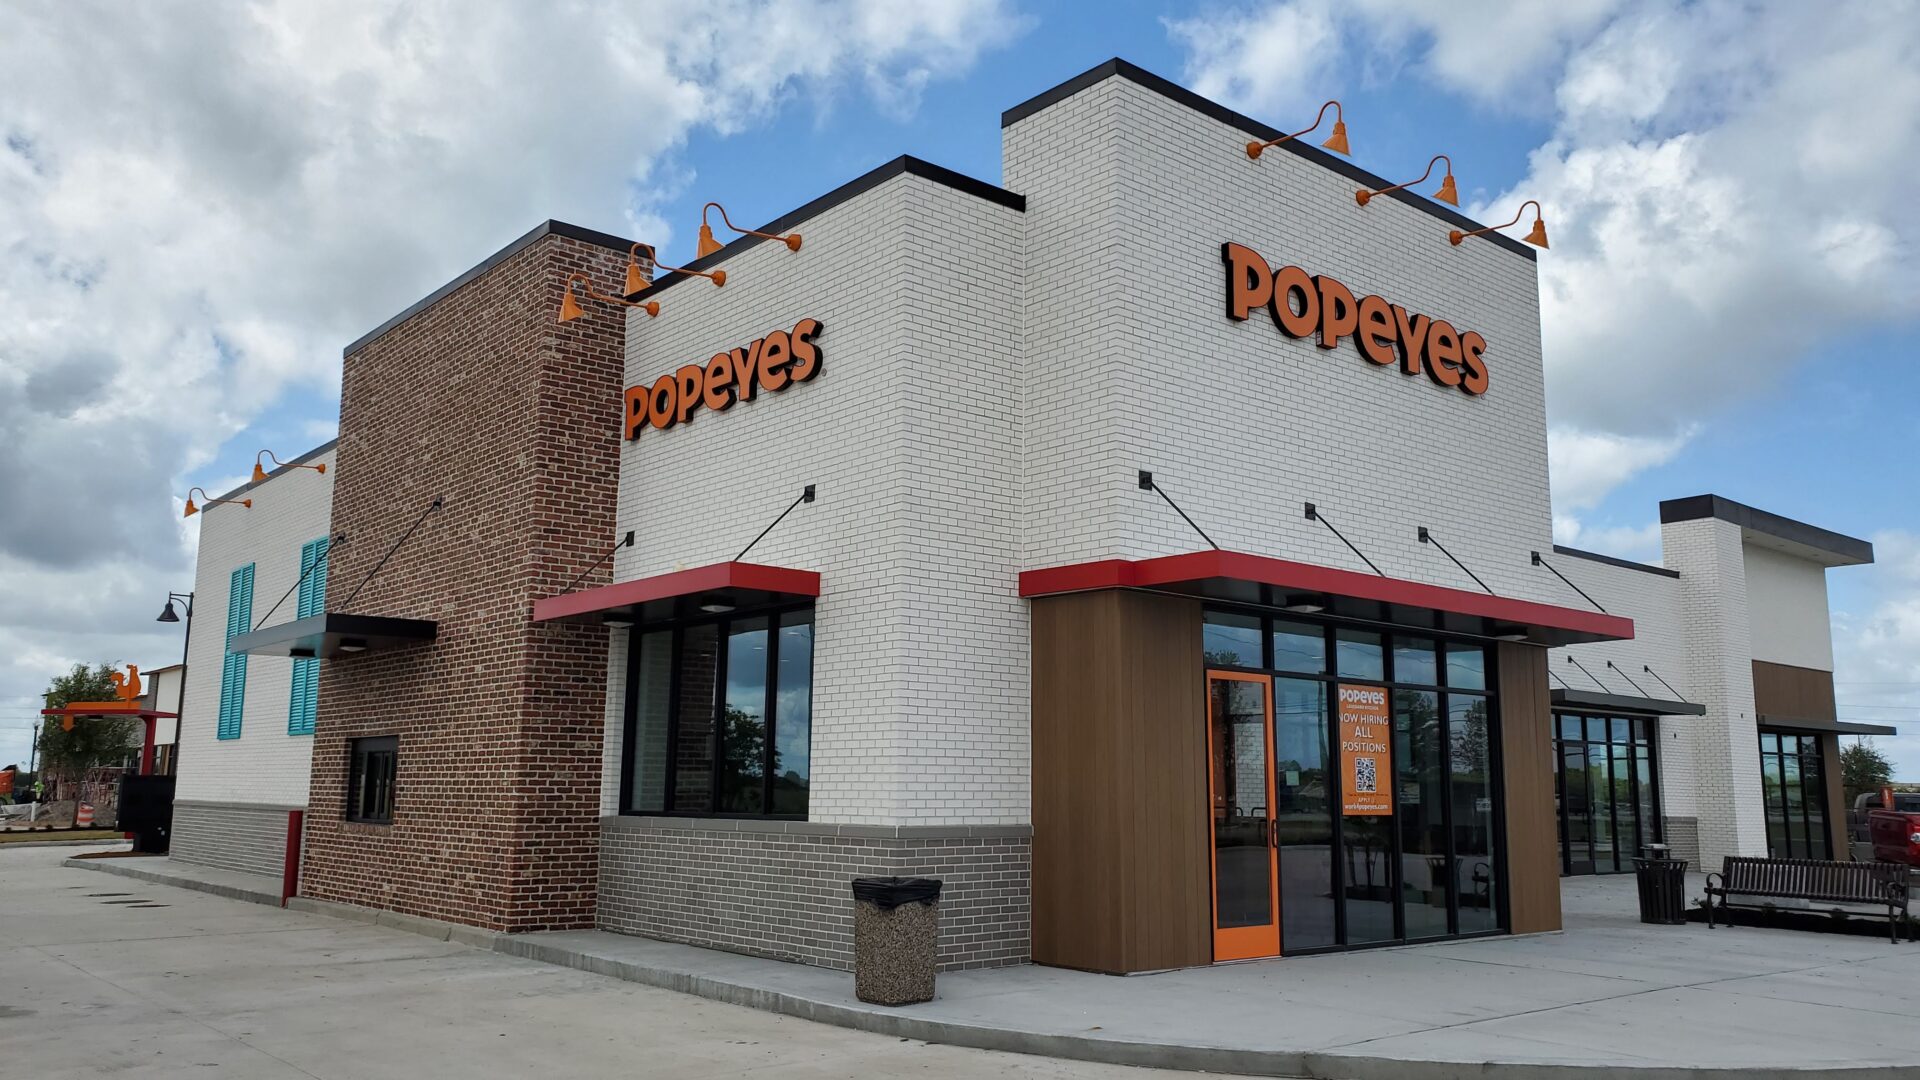 Popeyes restaurant front view on the display